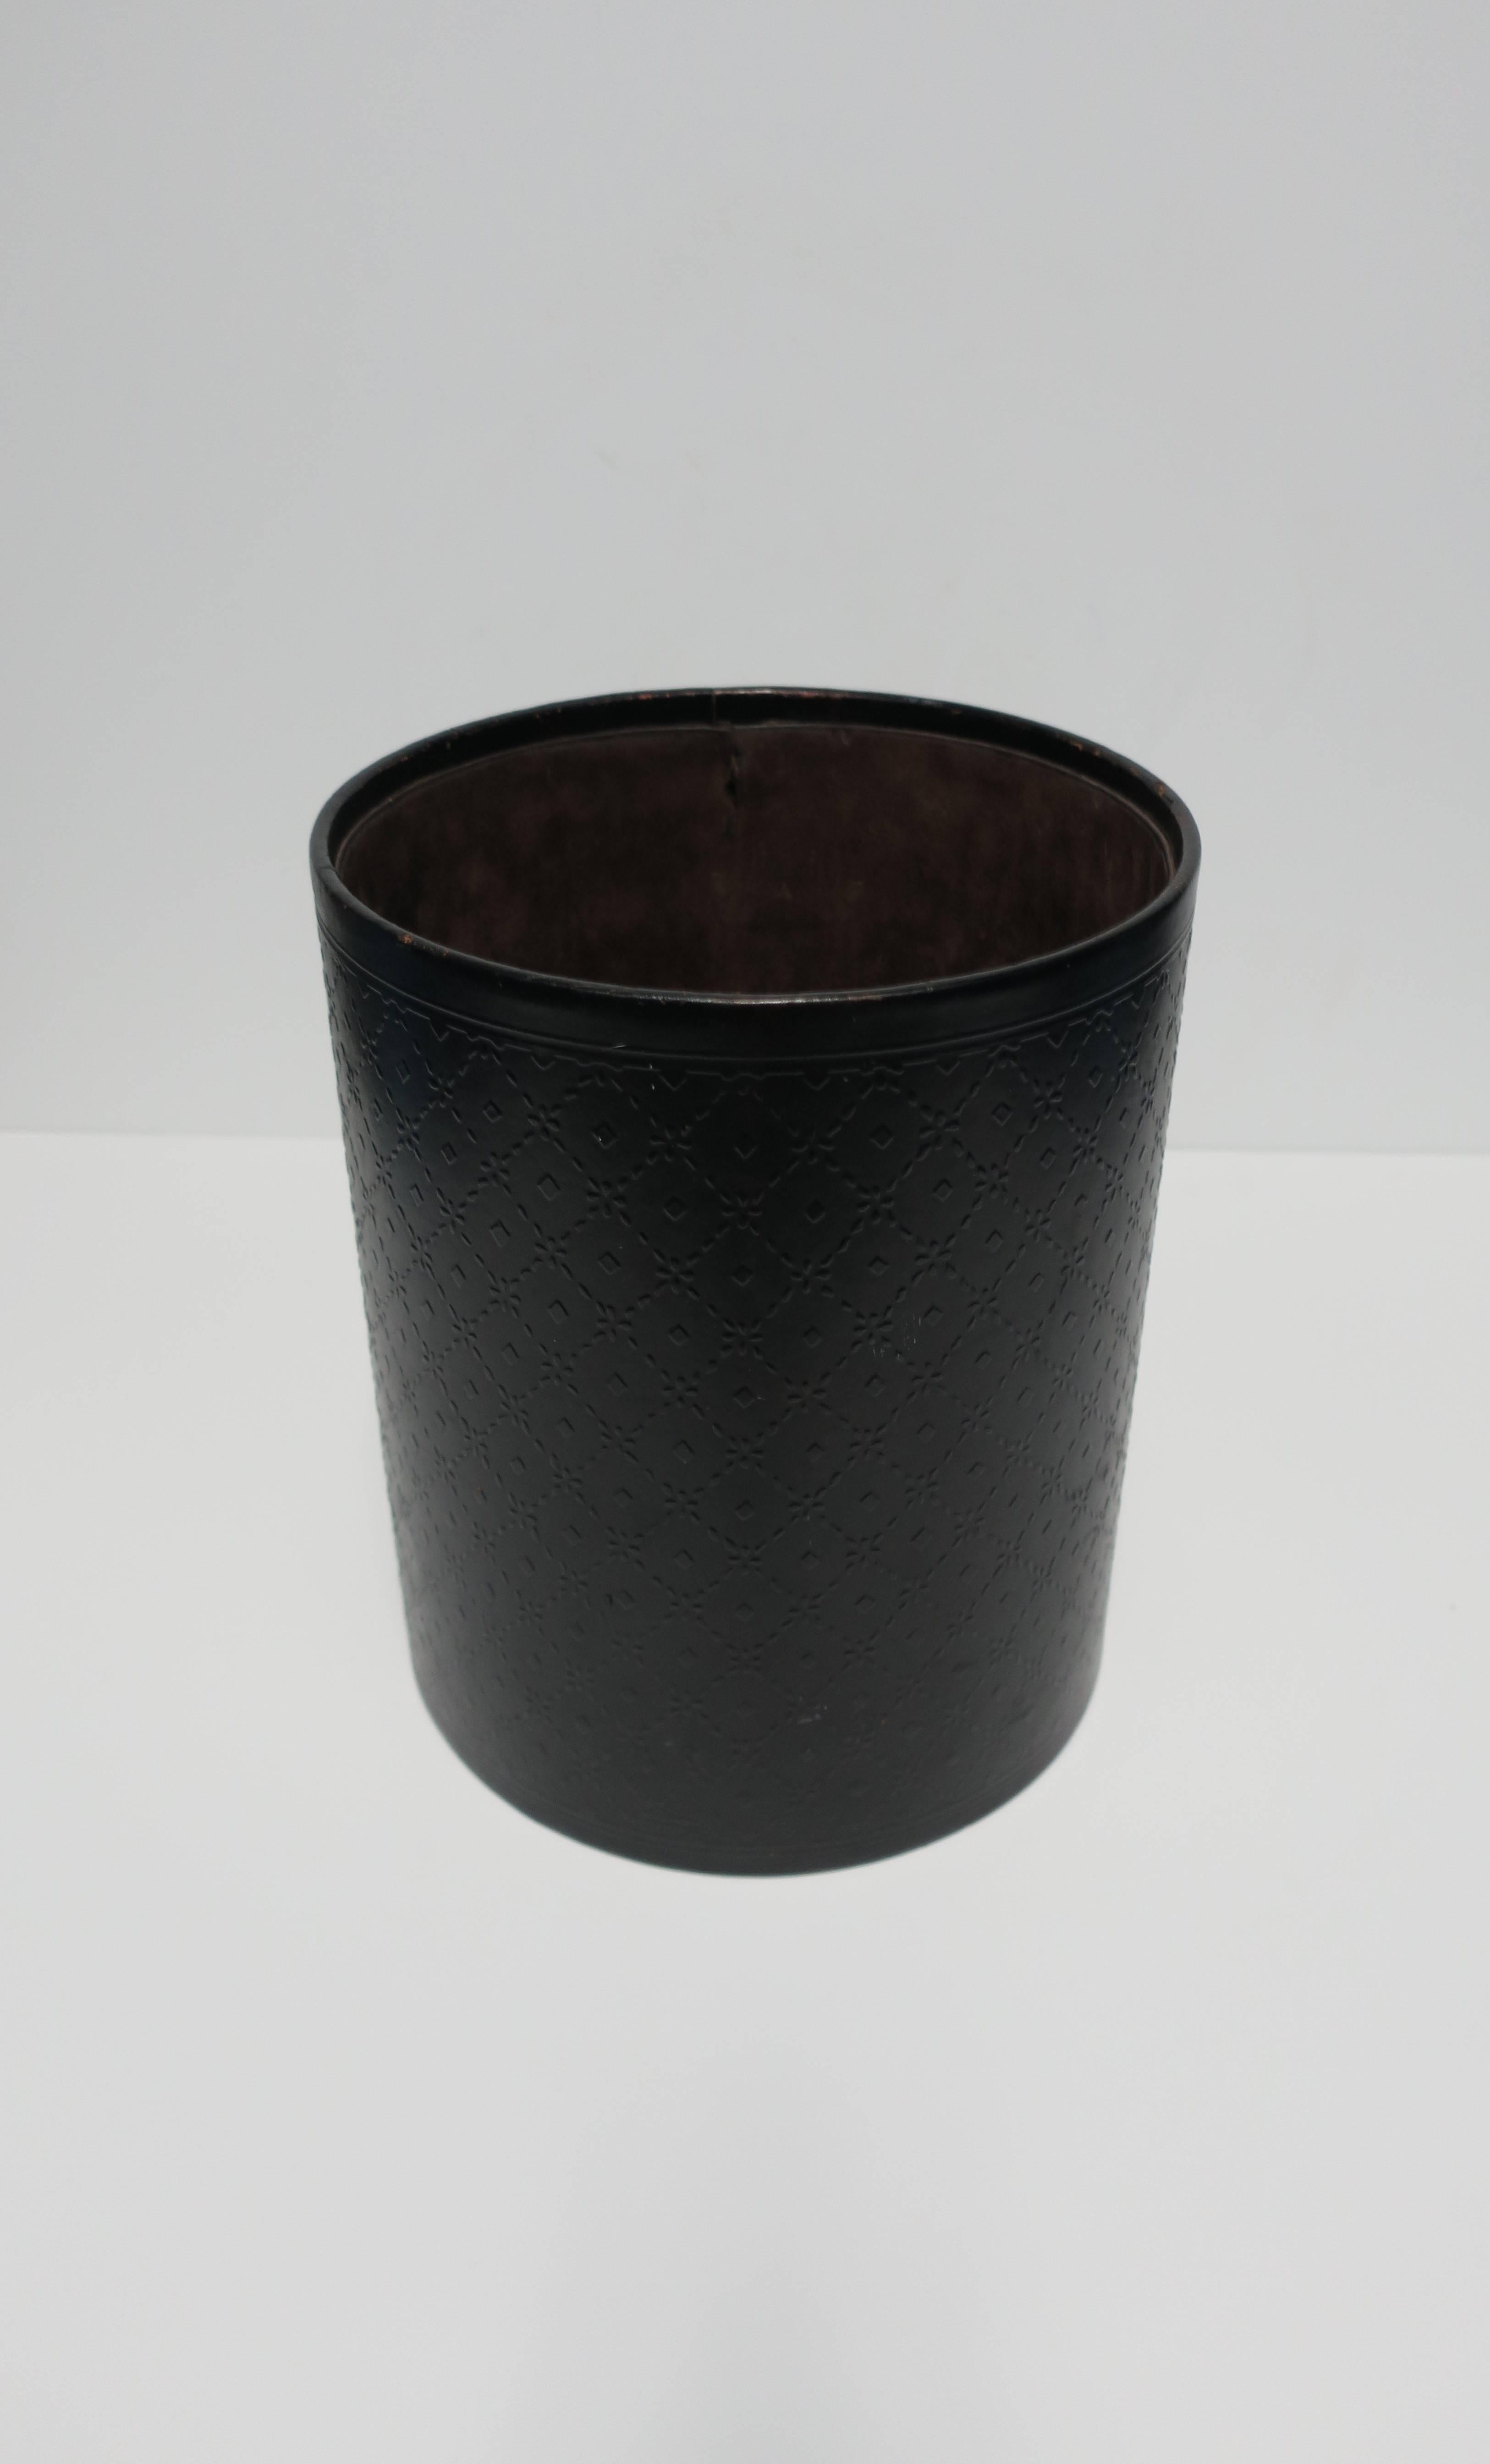 A vintage Italian black embossed leather wastebasket or trash can, marked made in Italy on bottom as show in image #10. Exterior has a diamond embossed design. Interior has a dark brown thin velvet lining with a similar look and feel to suede.